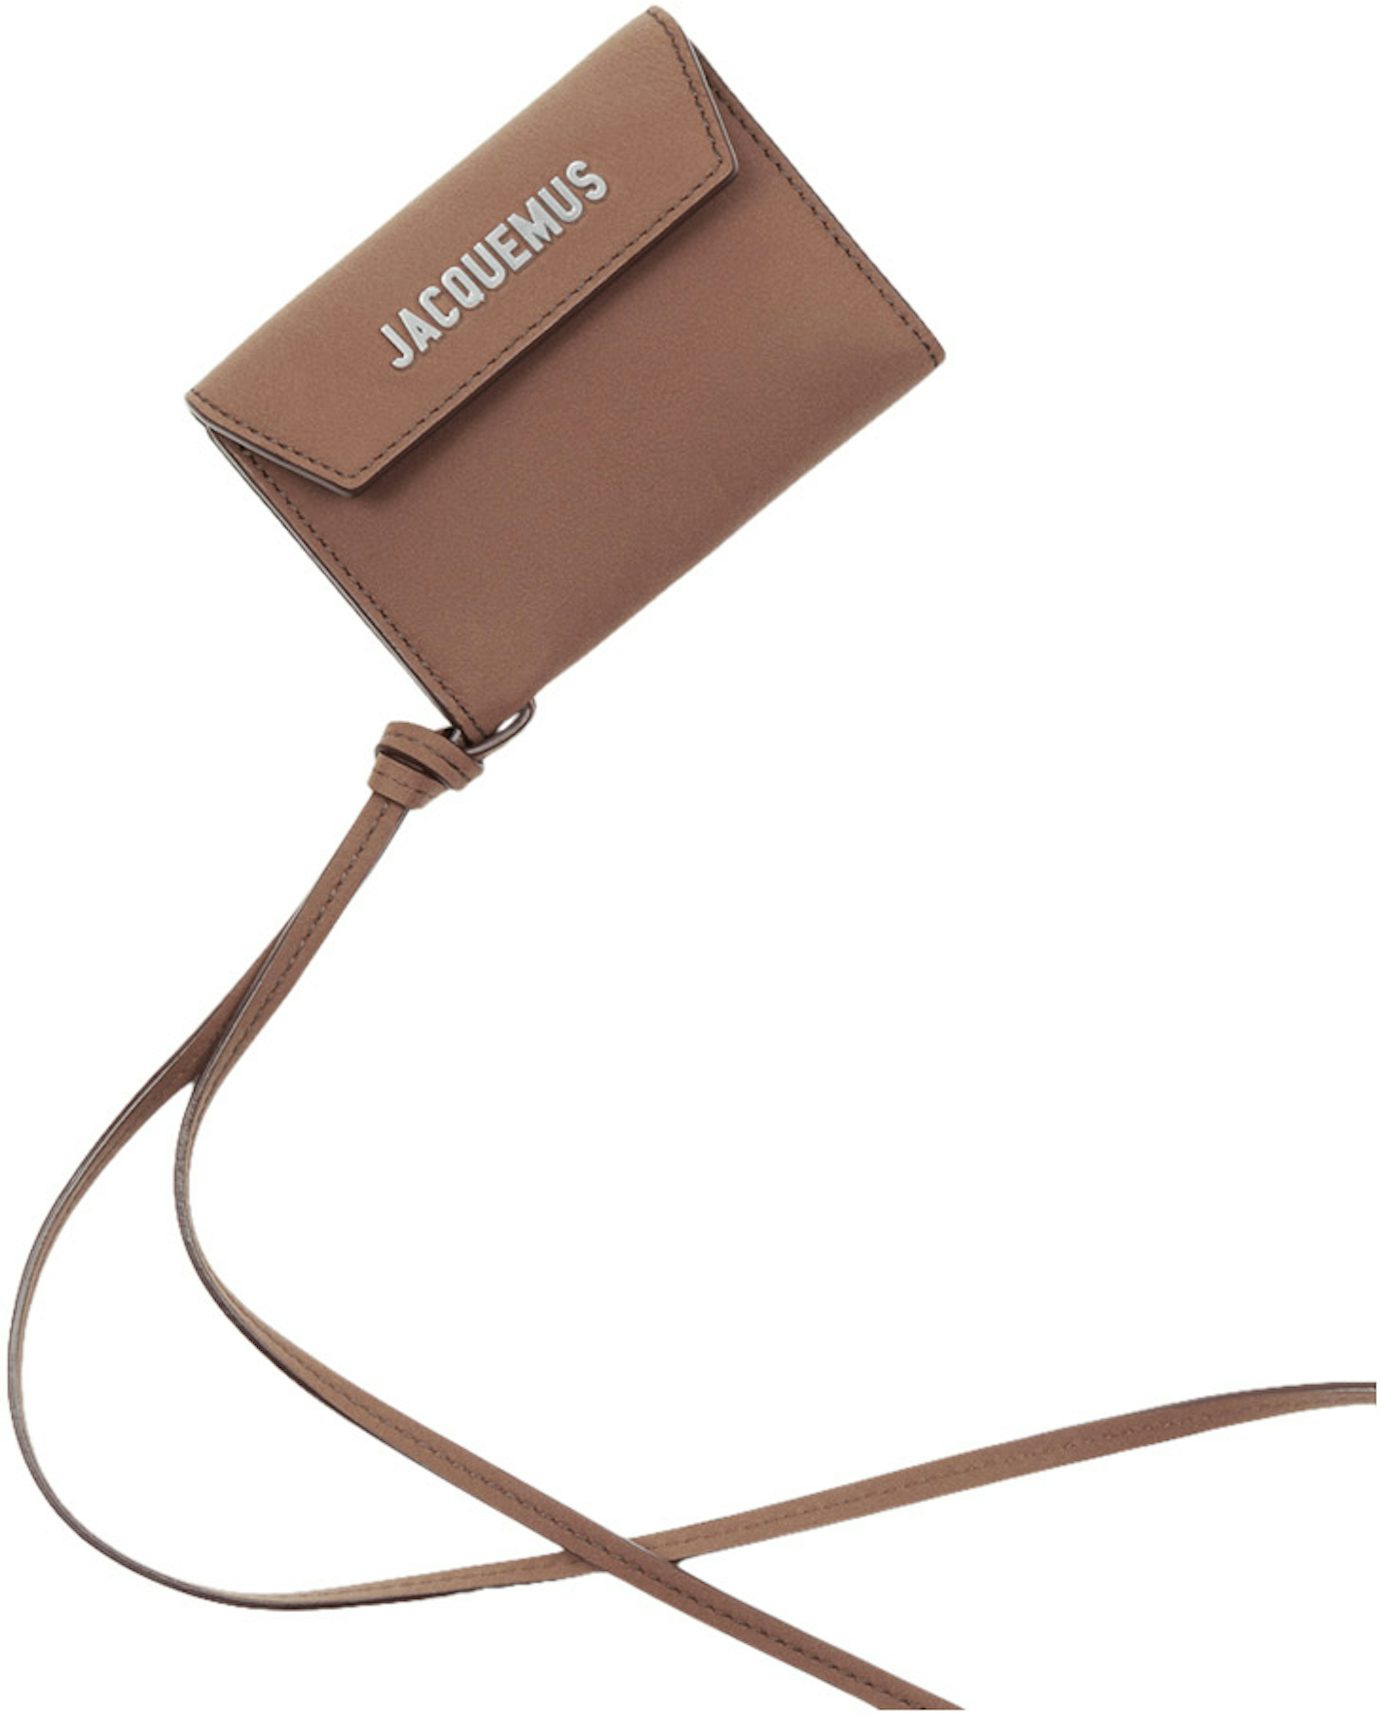 Le Porte Leather Wallet in Pink - Jacquemus